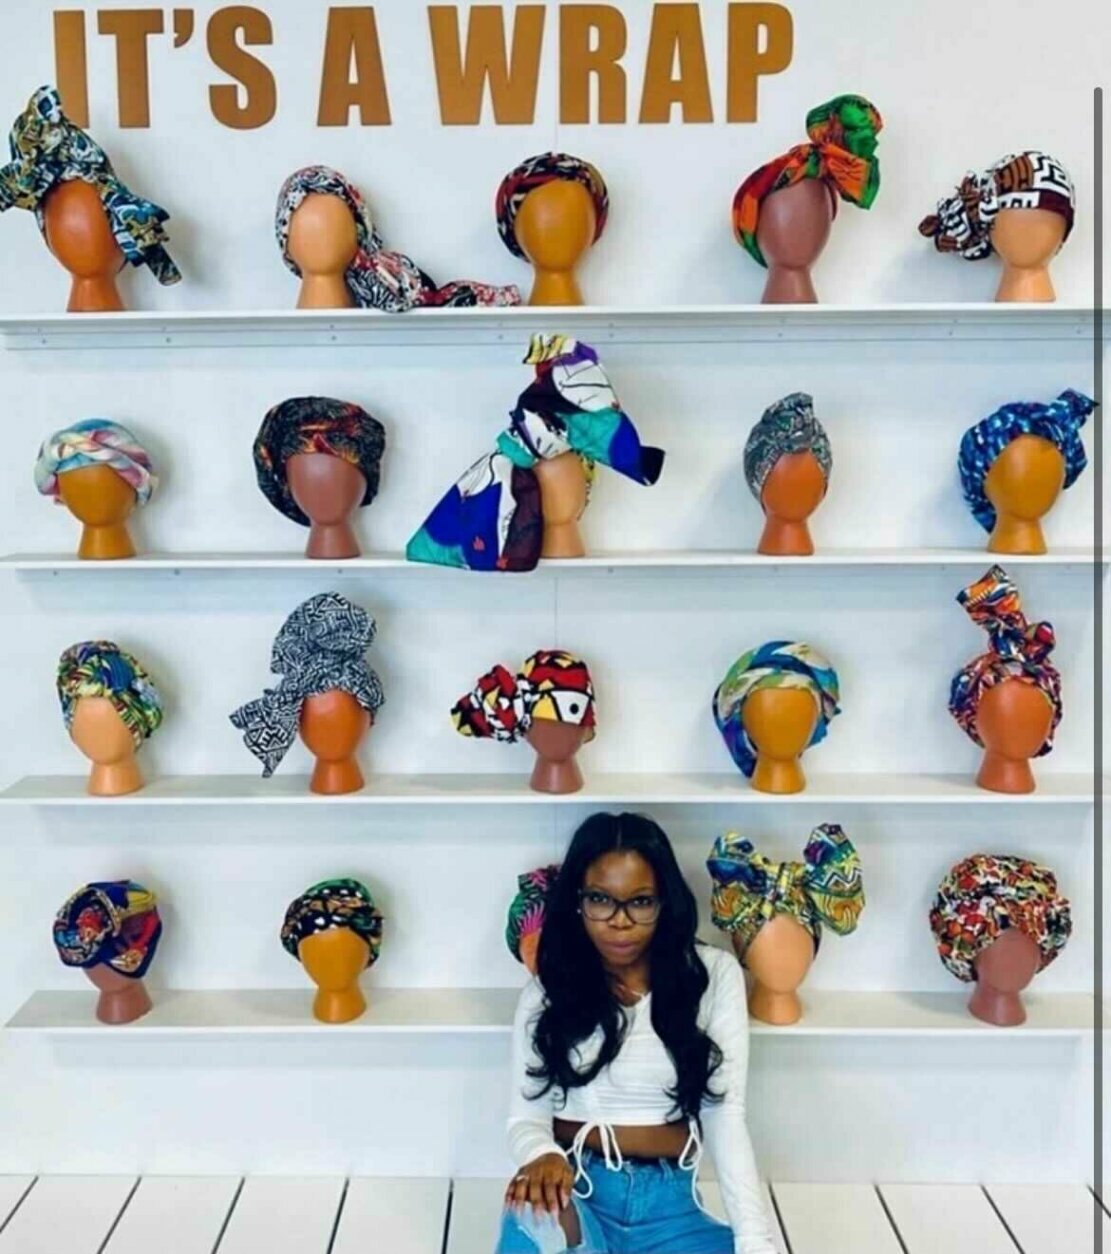 "The Black Hair Experience," a new pop-up art exhibit at National Harbor, celebrates Black beauty and culture in the social media age.